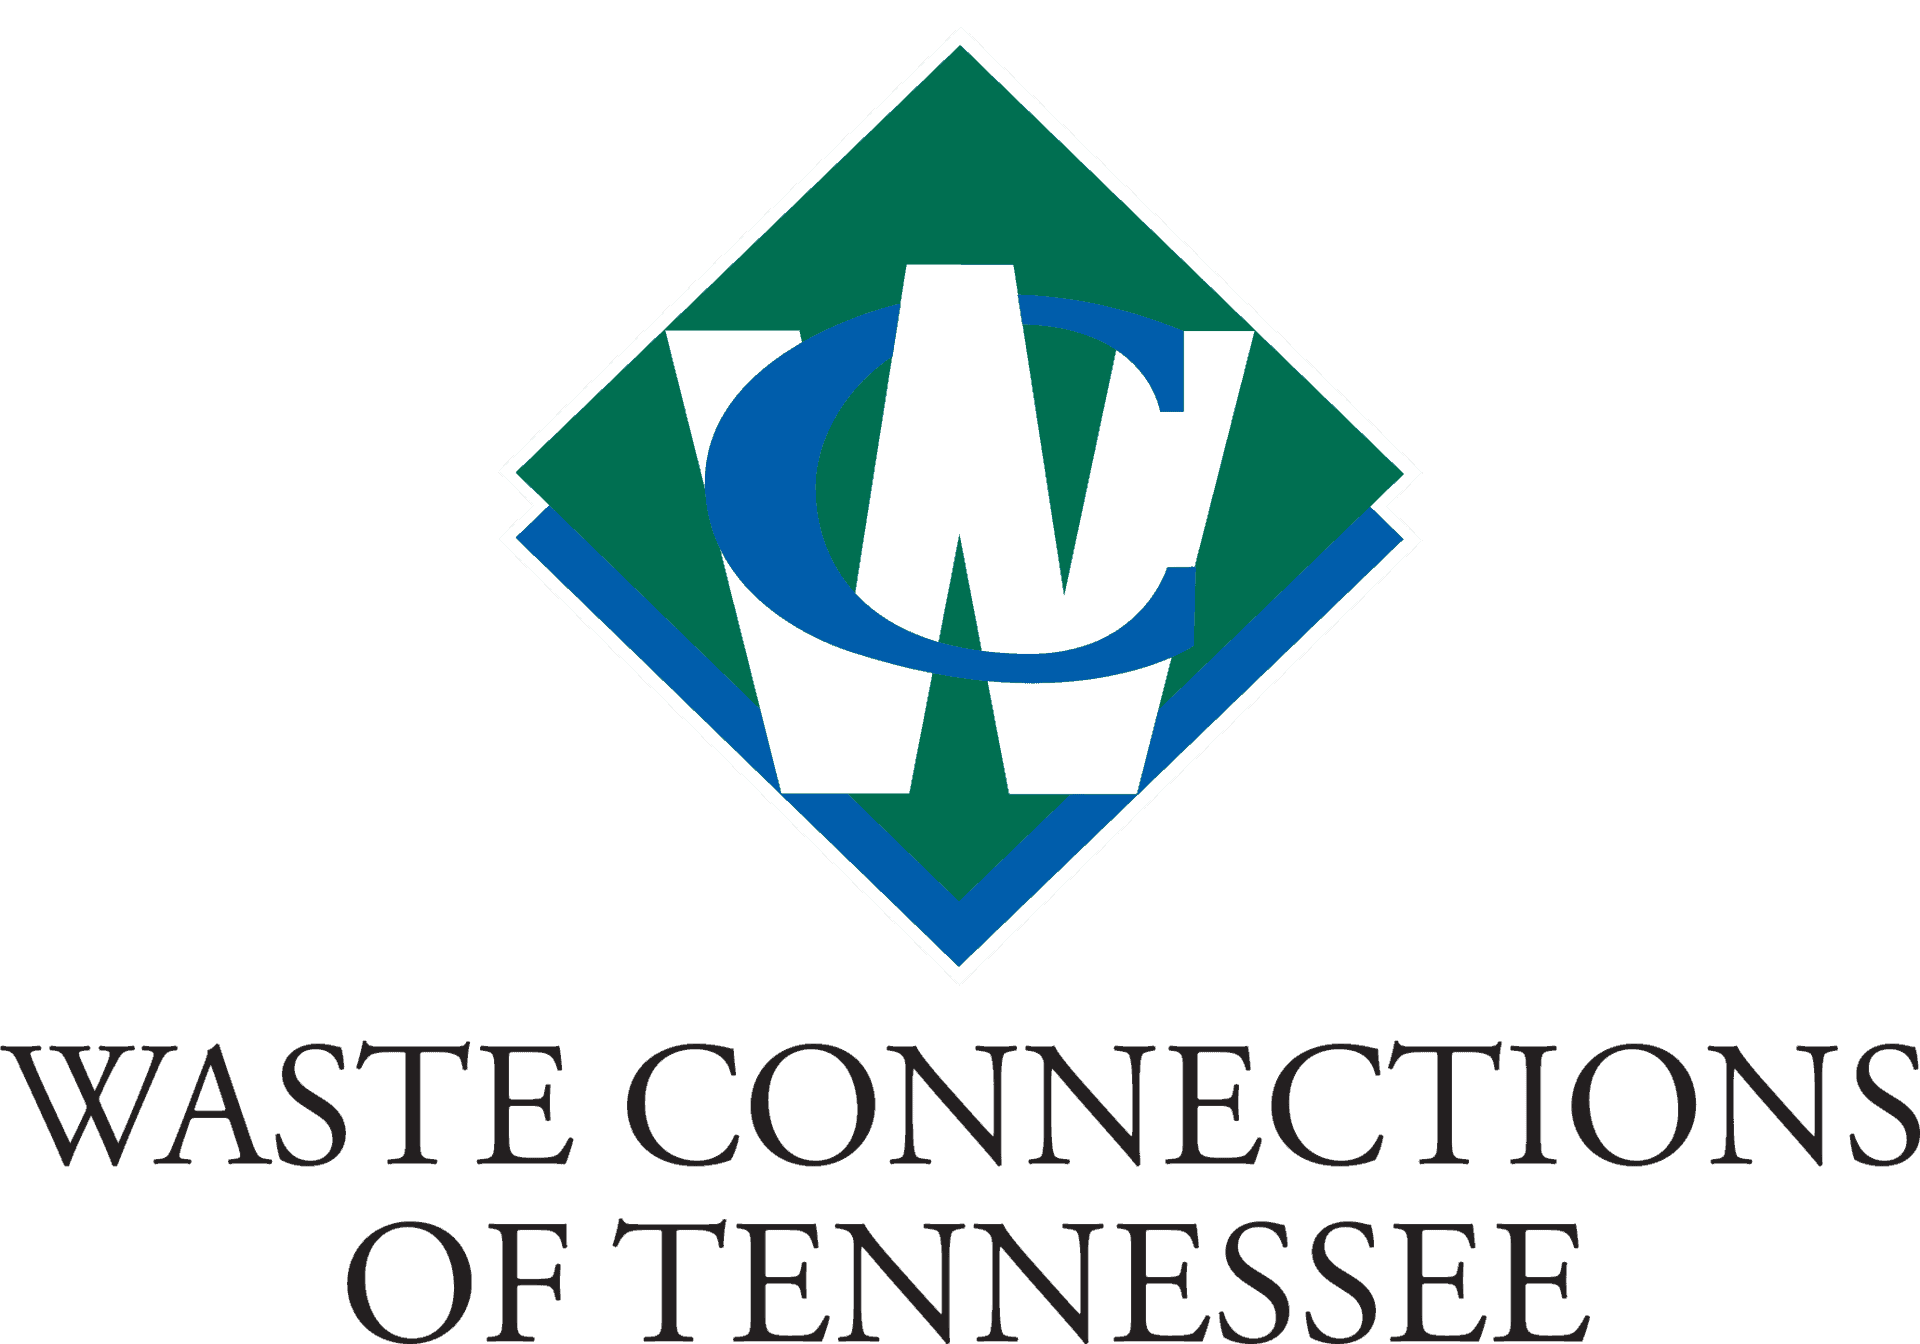 Waste connections of tennessee logo.